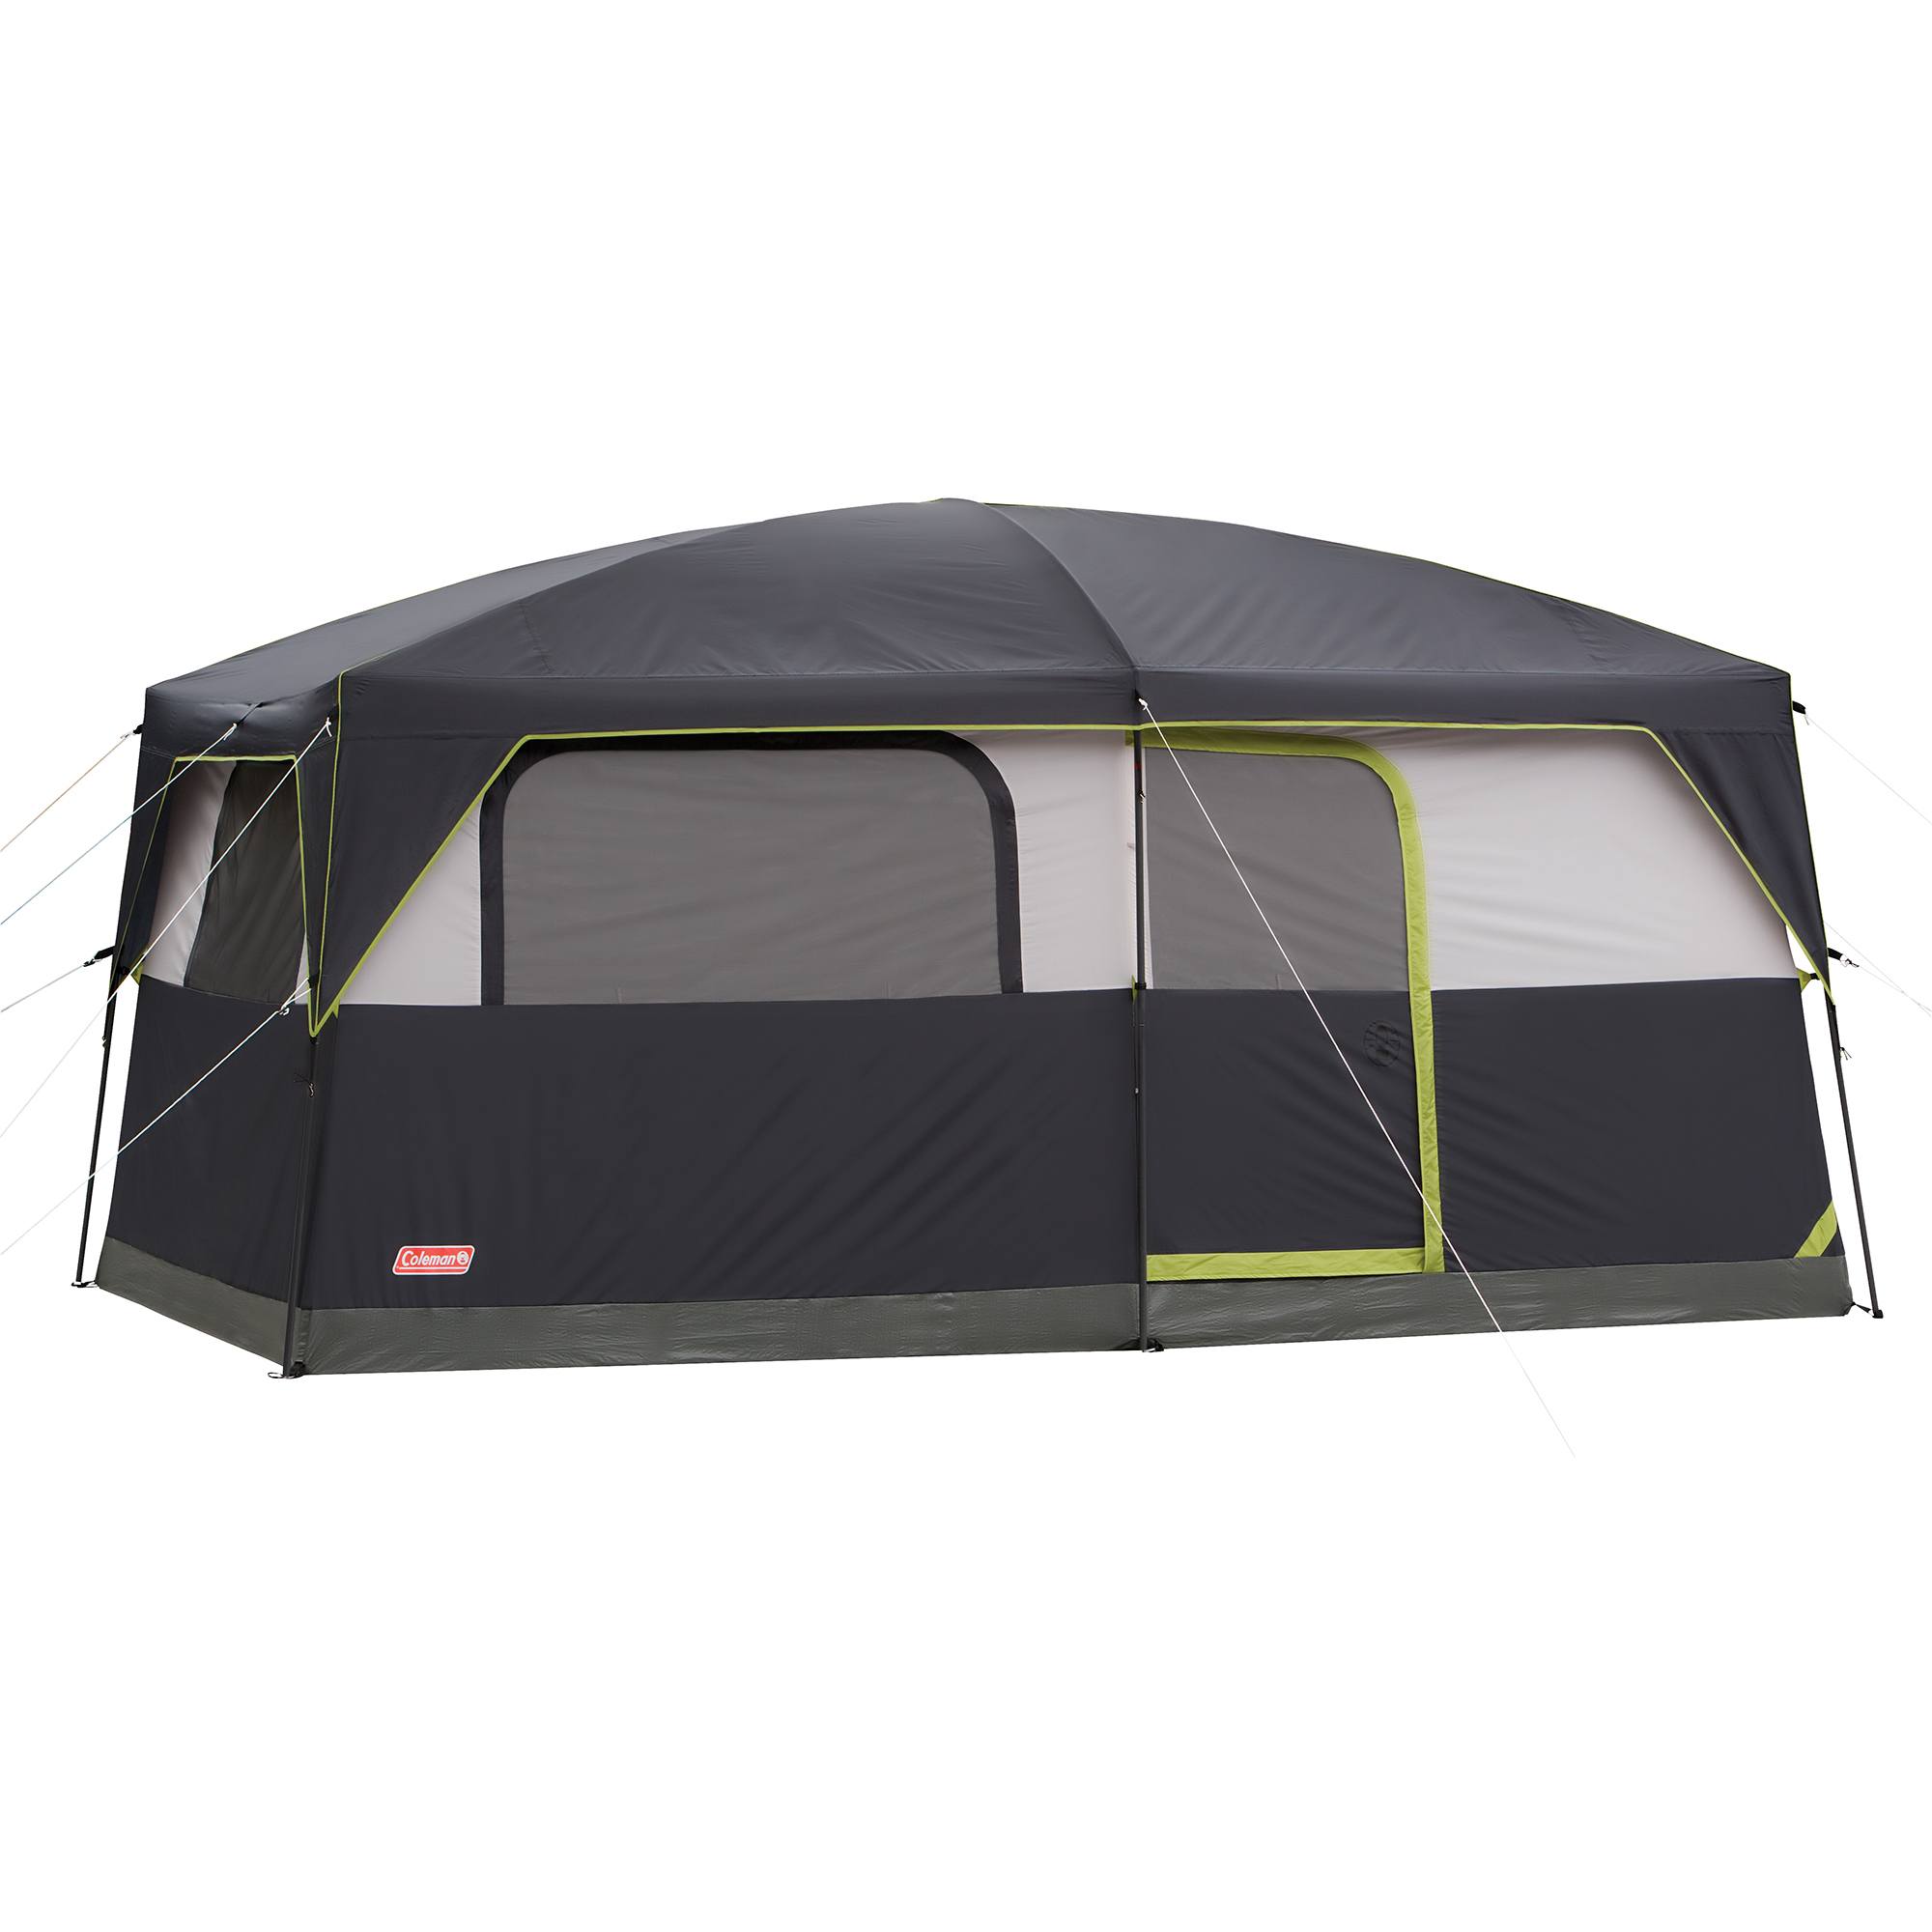 Coleman 8-Person Cabin Tents - image 1 of 7